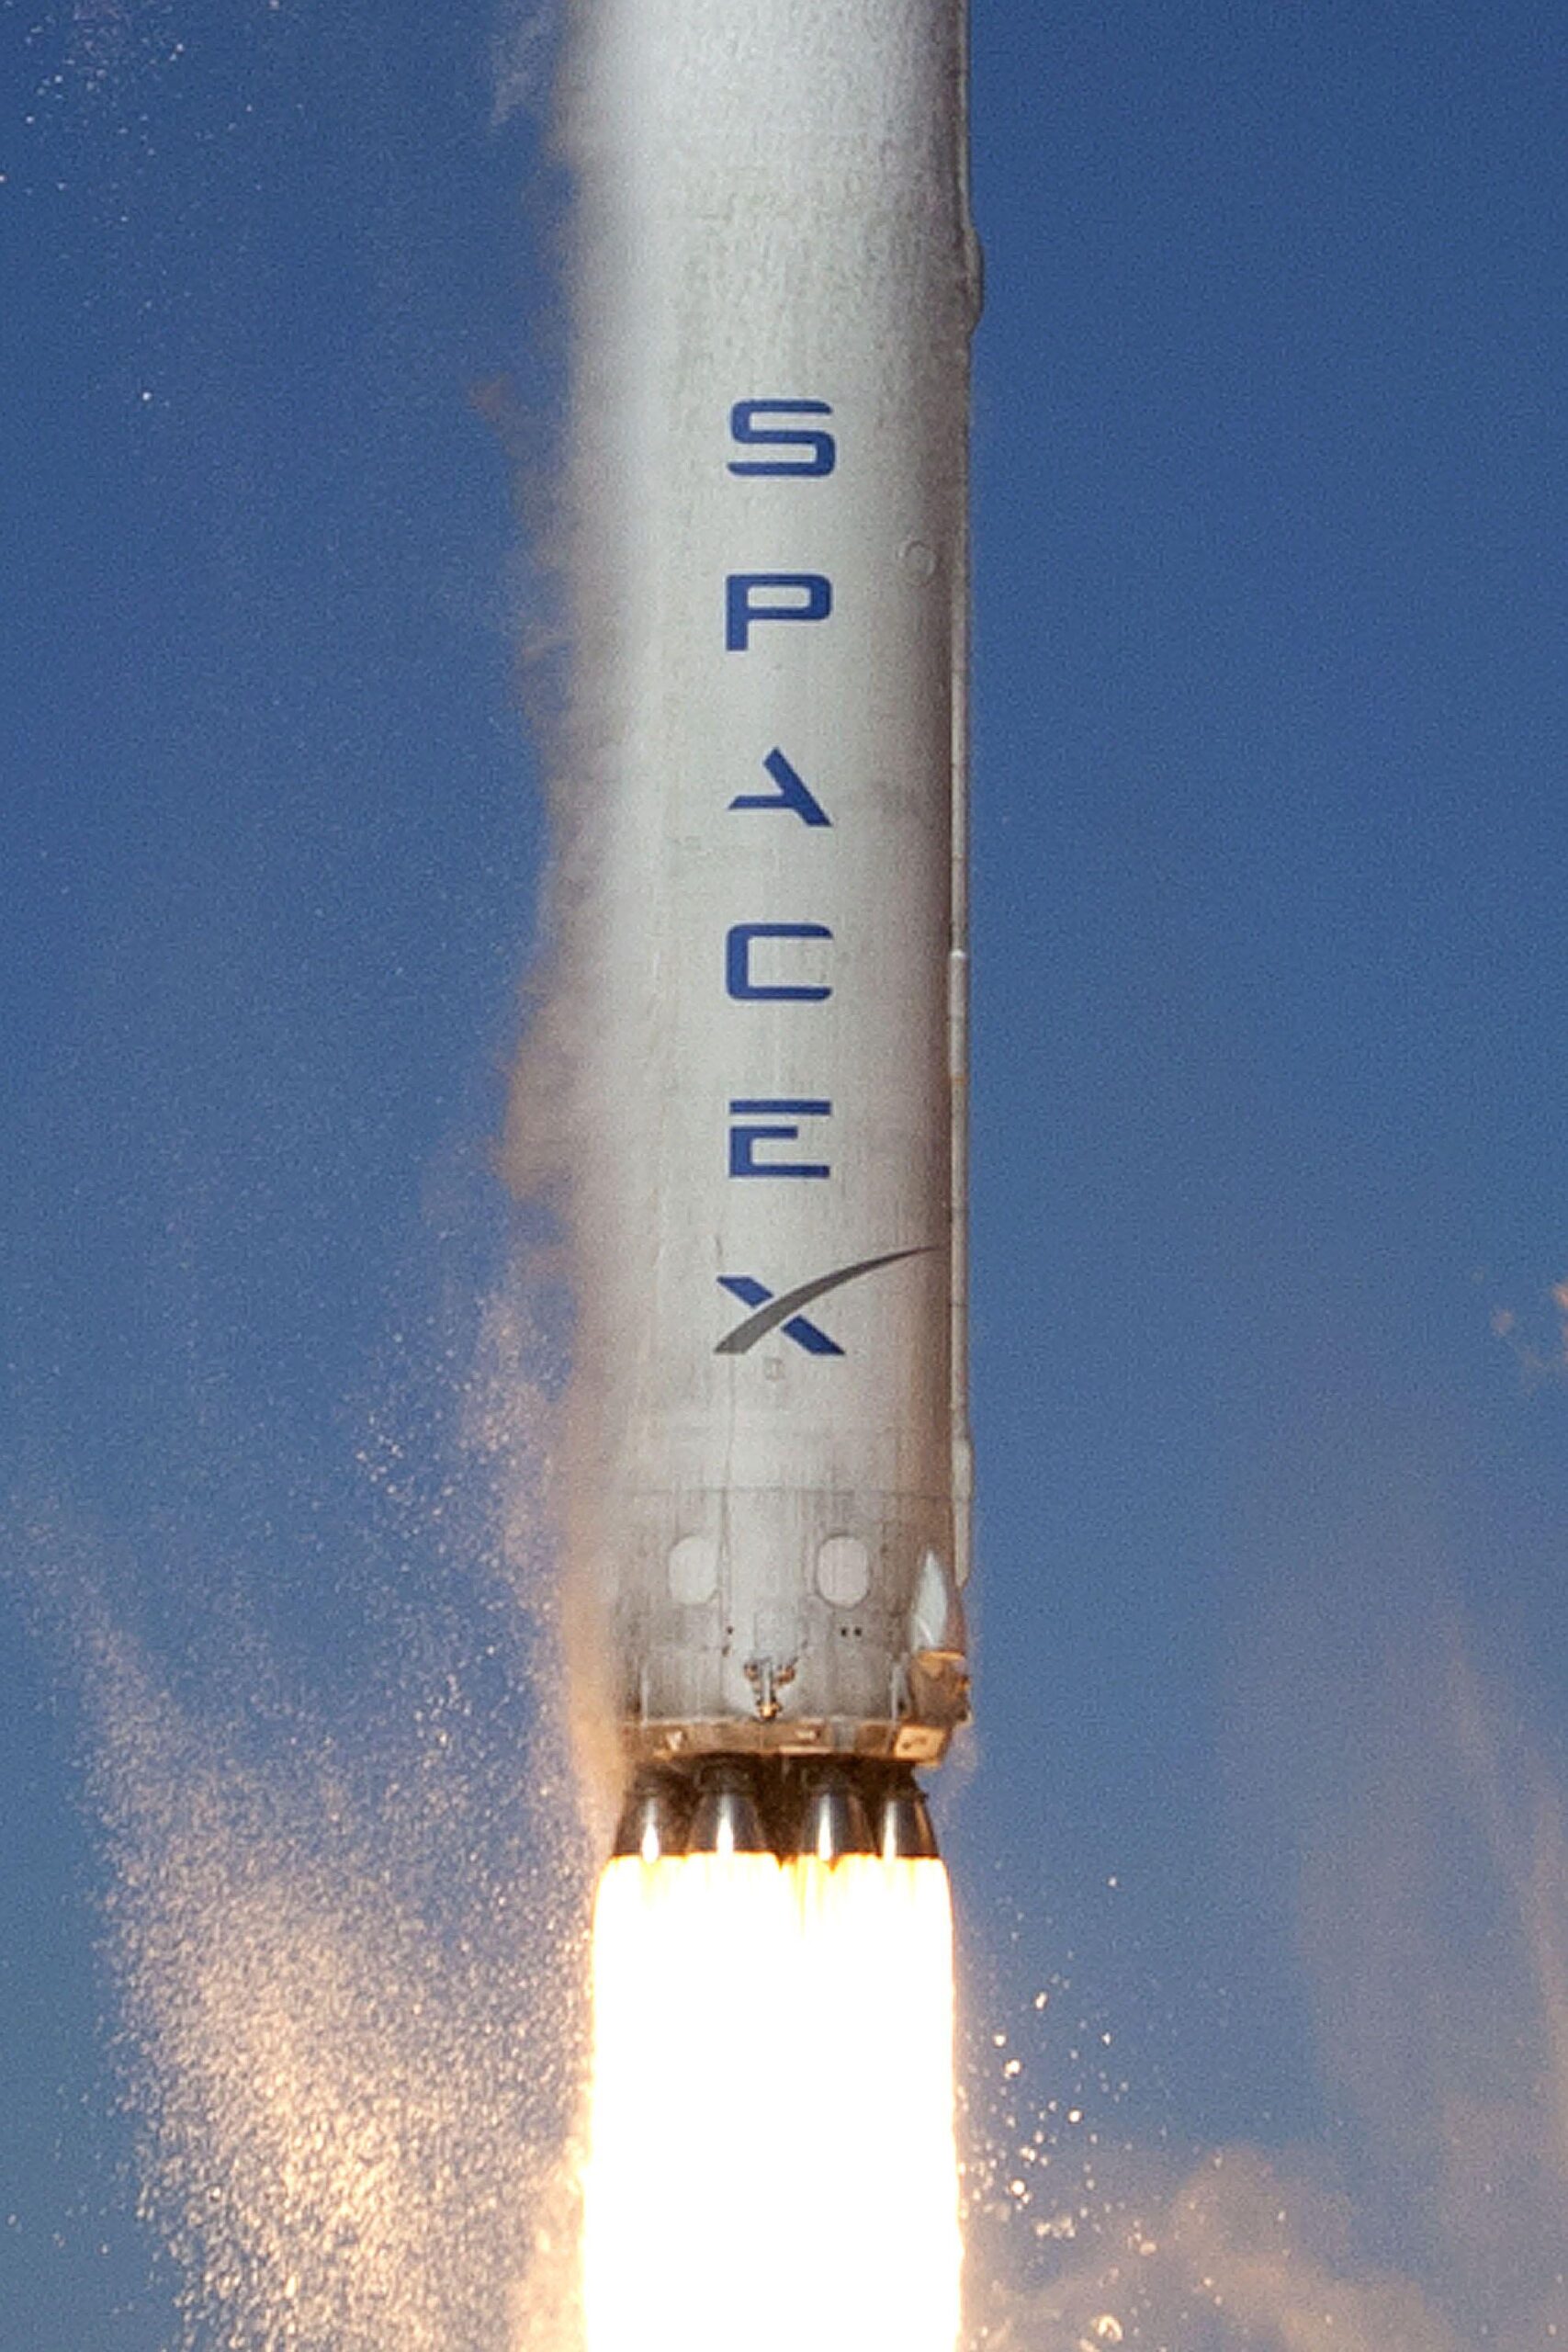 Following launch failure, SpaceX preparing to debut ‘significantly